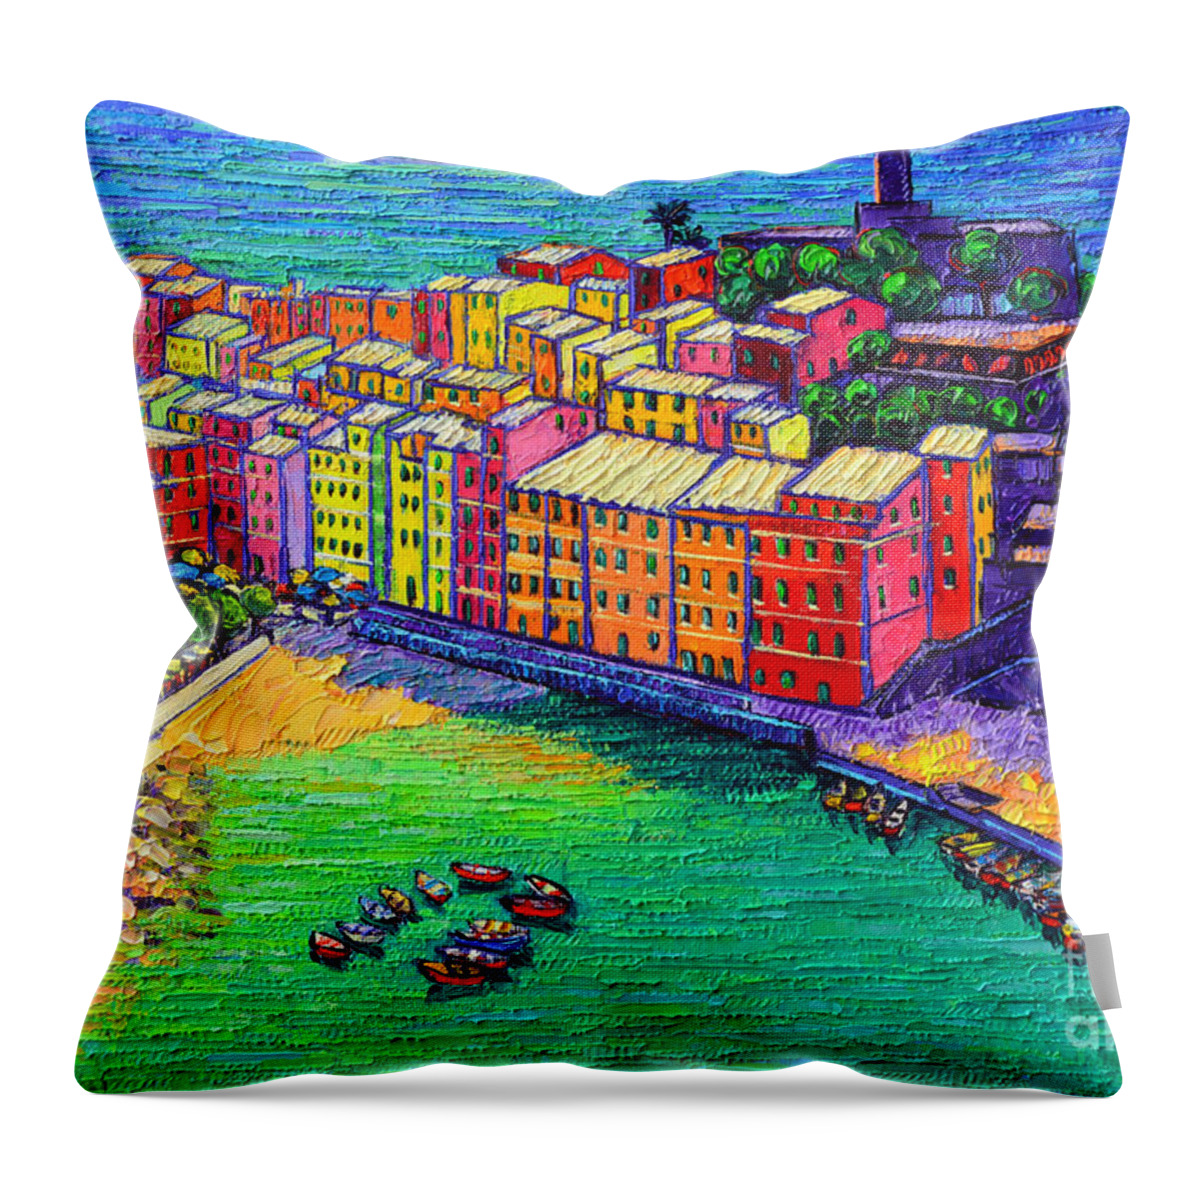 Vernazza Throw Pillow featuring the painting Vernazza Cinque Terre Italy Painting Detail by Ana Maria Edulescu